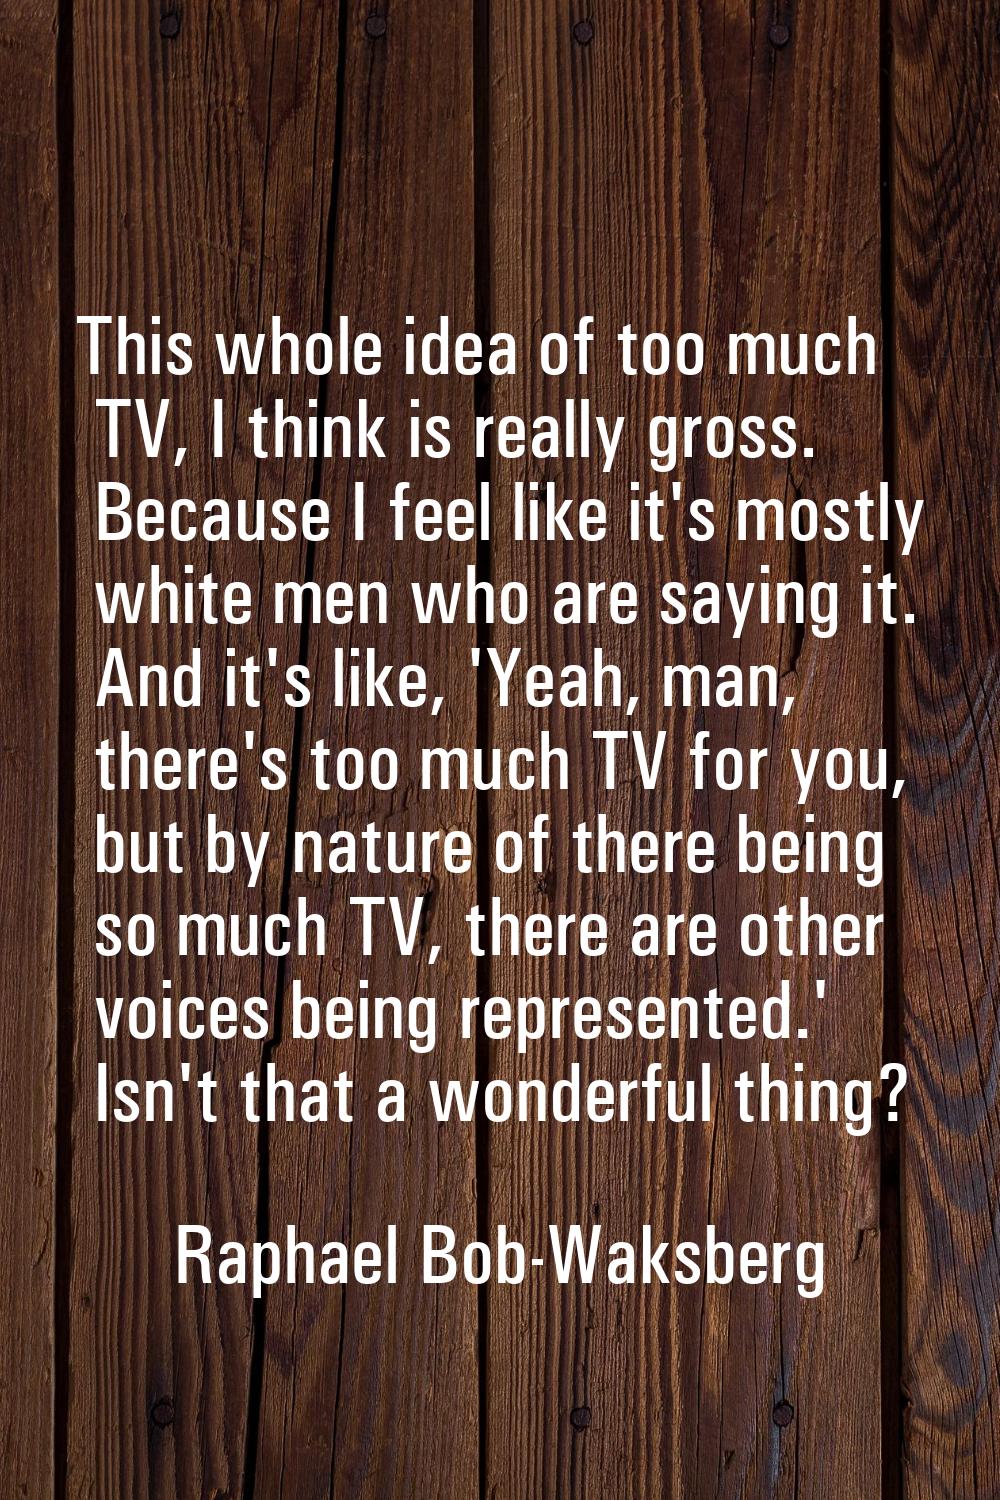 This whole idea of too much TV, I think is really gross. Because I feel like it's mostly white men 